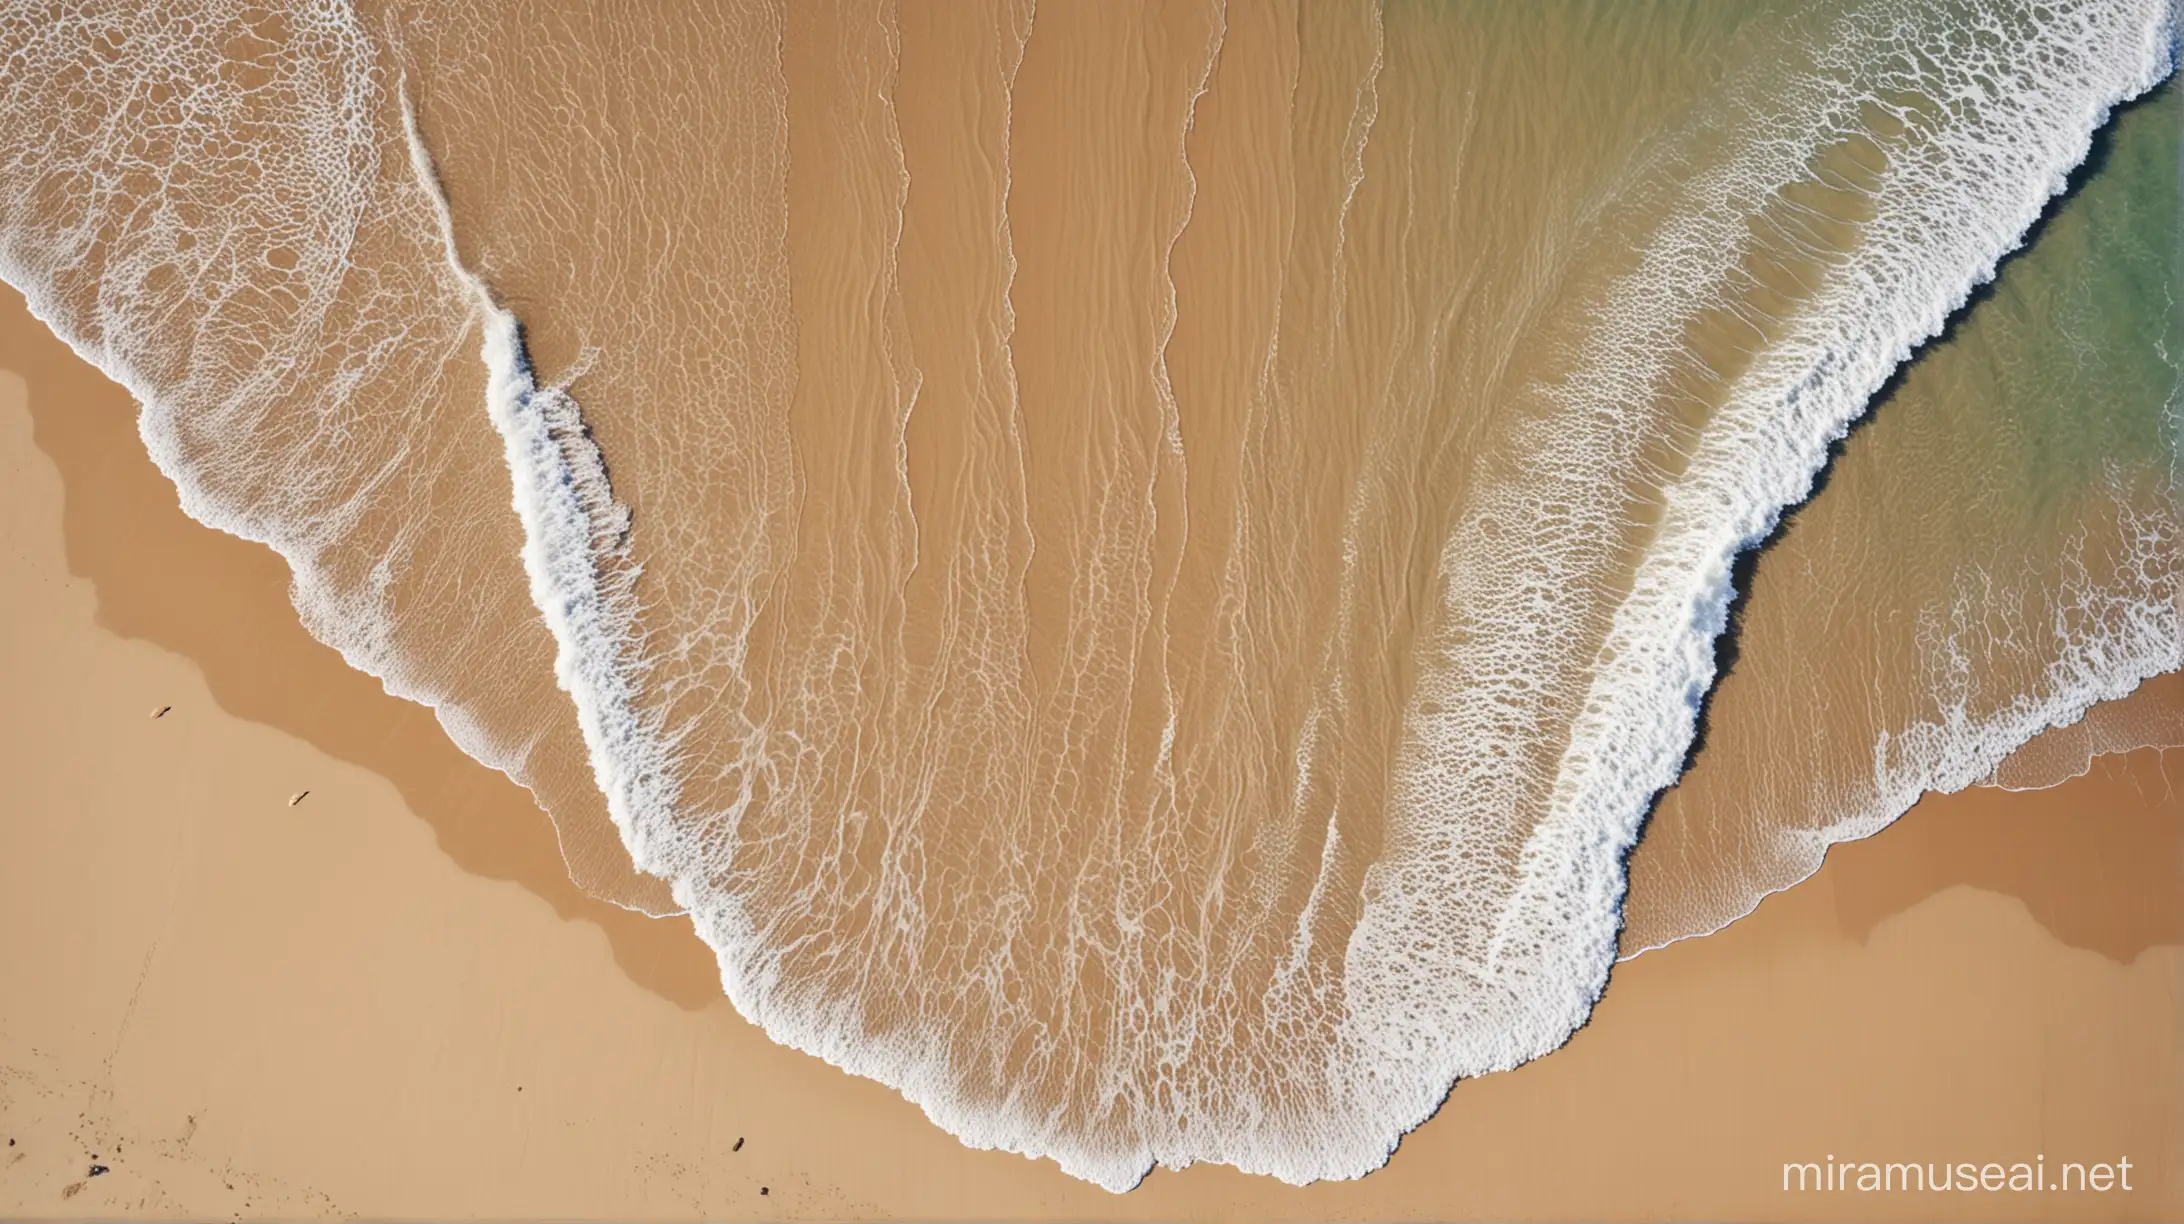 gentle waves rolling on a sandy beach shore as viewed from 1000 feet directly overhead